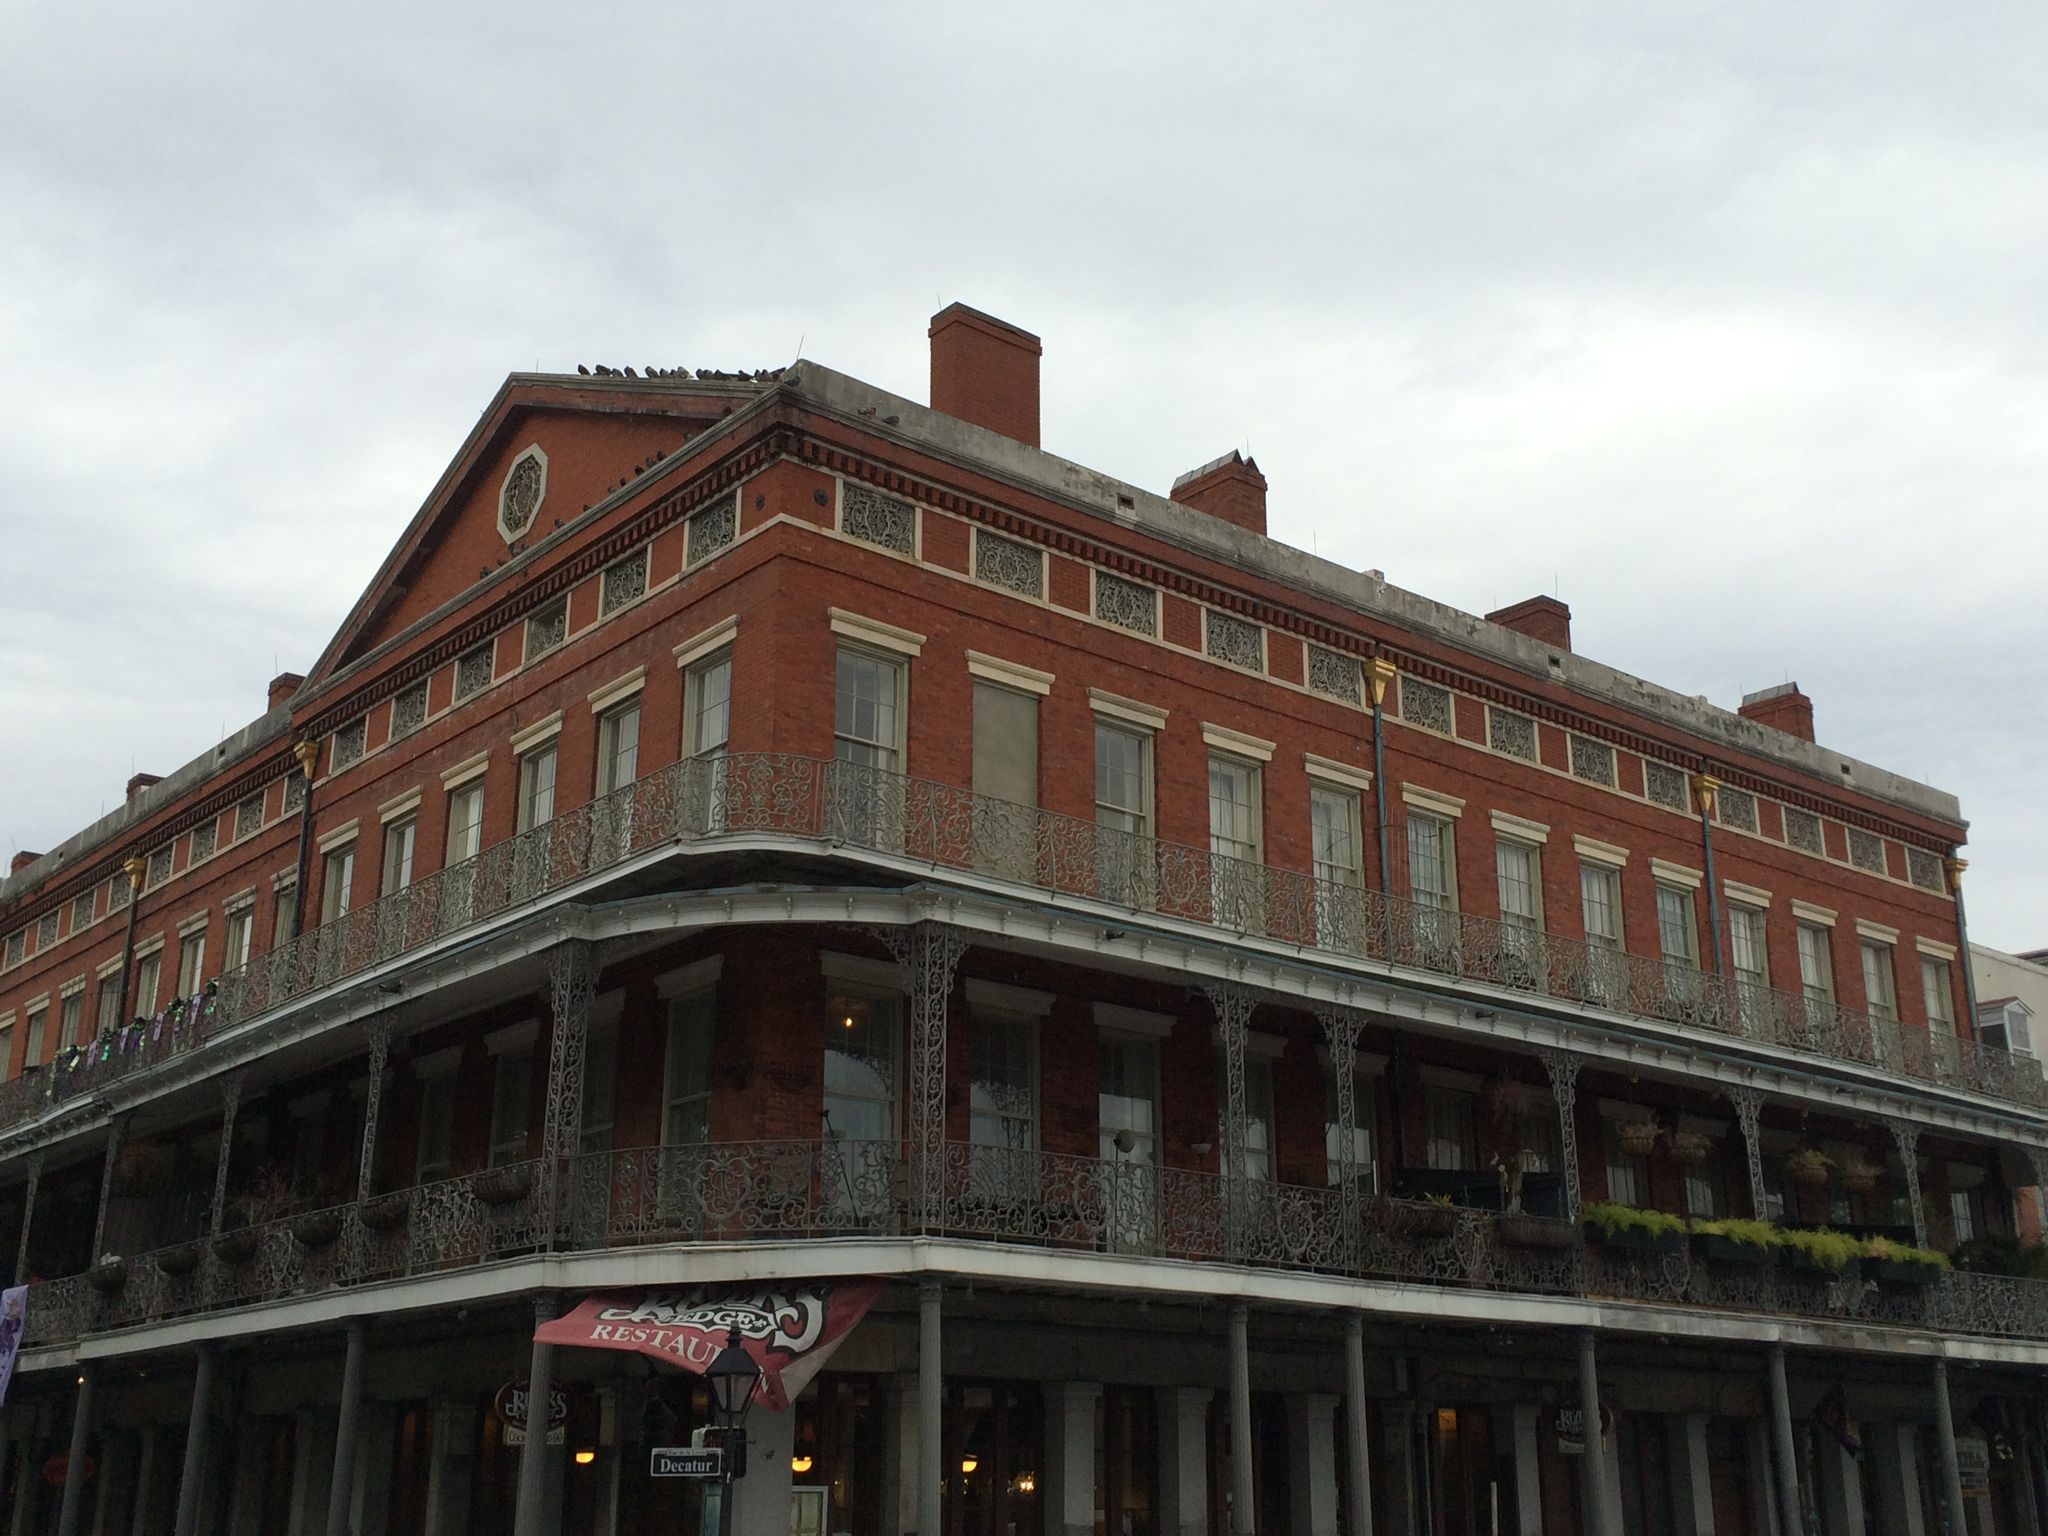 Photo 26 of 44 from the album Highlights New York – New Orleans 2014.